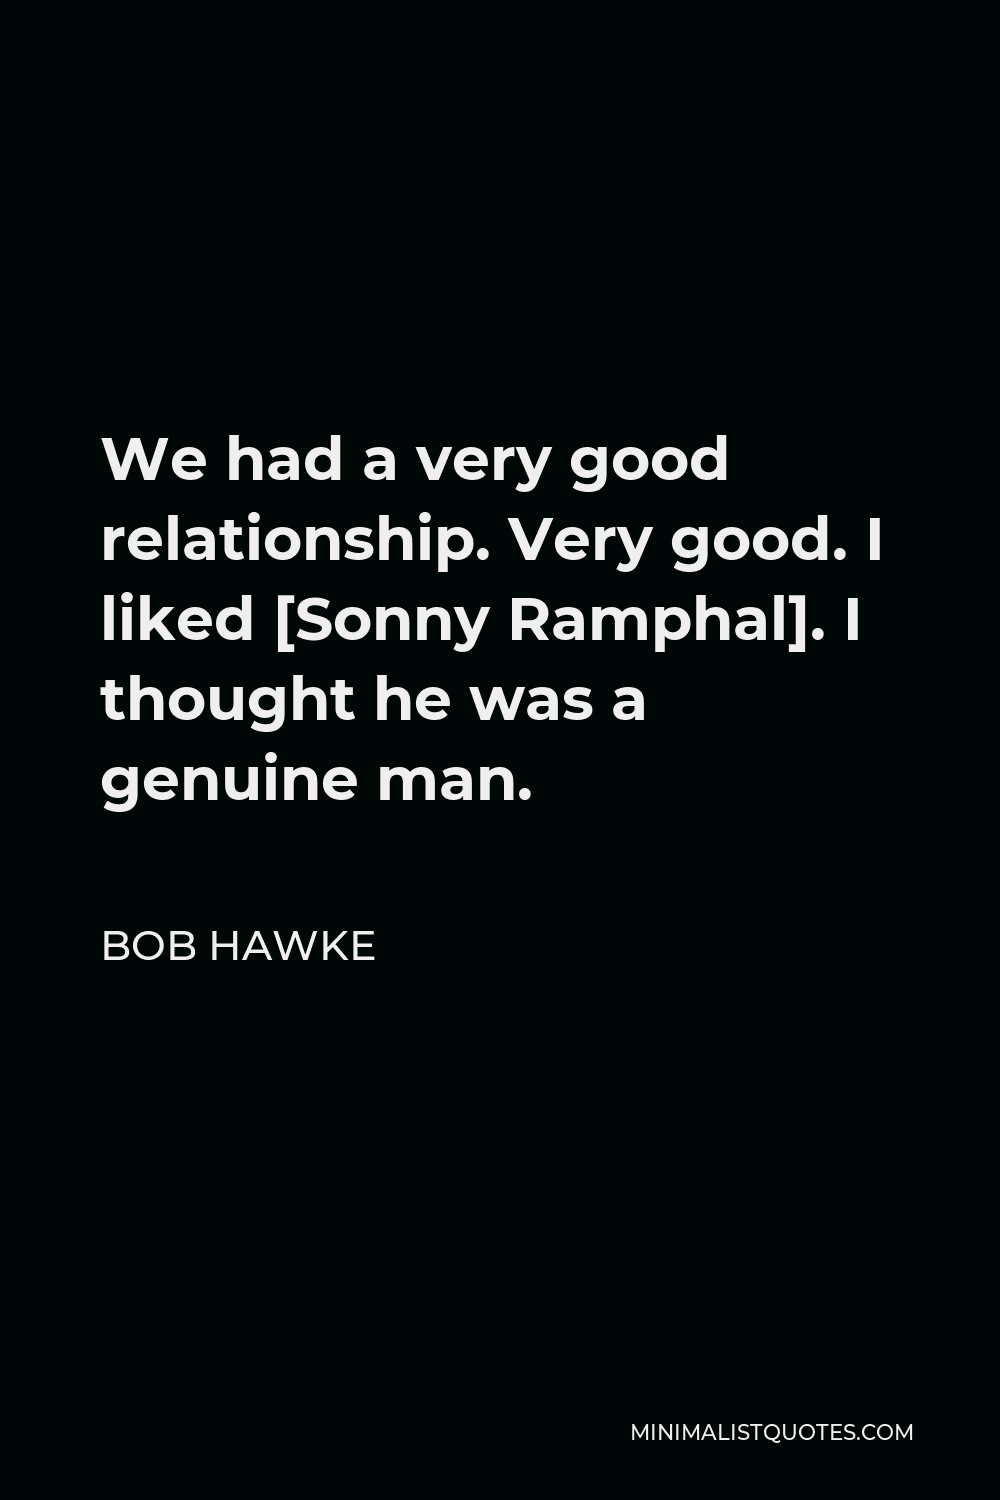 Bob Hawke Quote - We had a very good relationship. Very good. I liked [Sonny Ramphal]. I thought he was a genuine man.